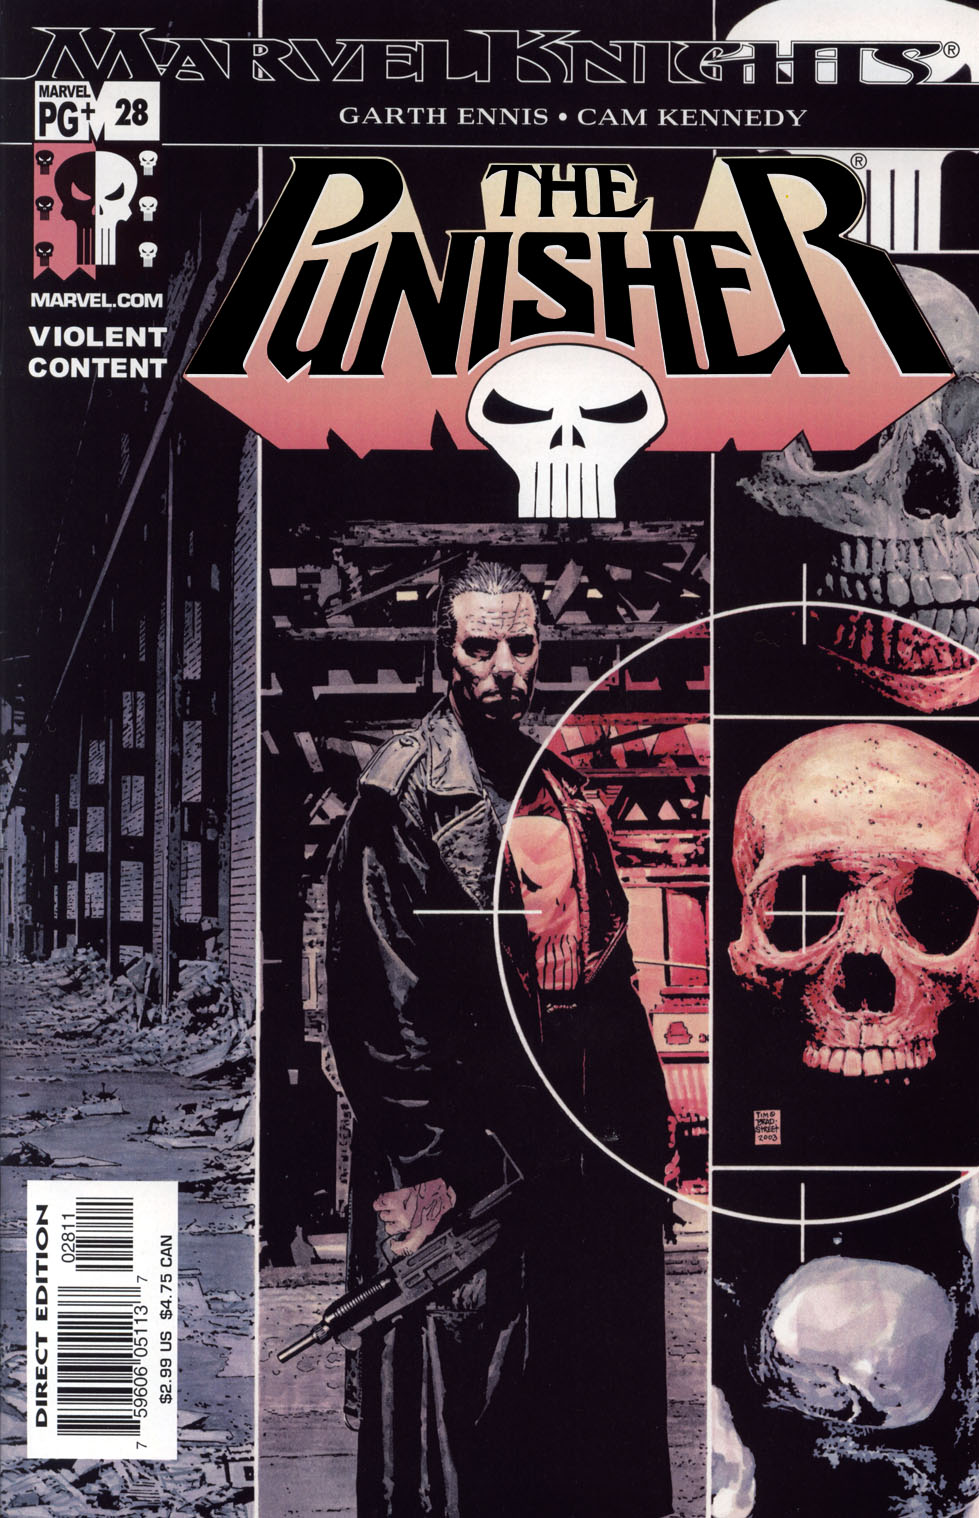 The Punisher (2001) issue 28 - Streets of Laredo #01 - Page 1